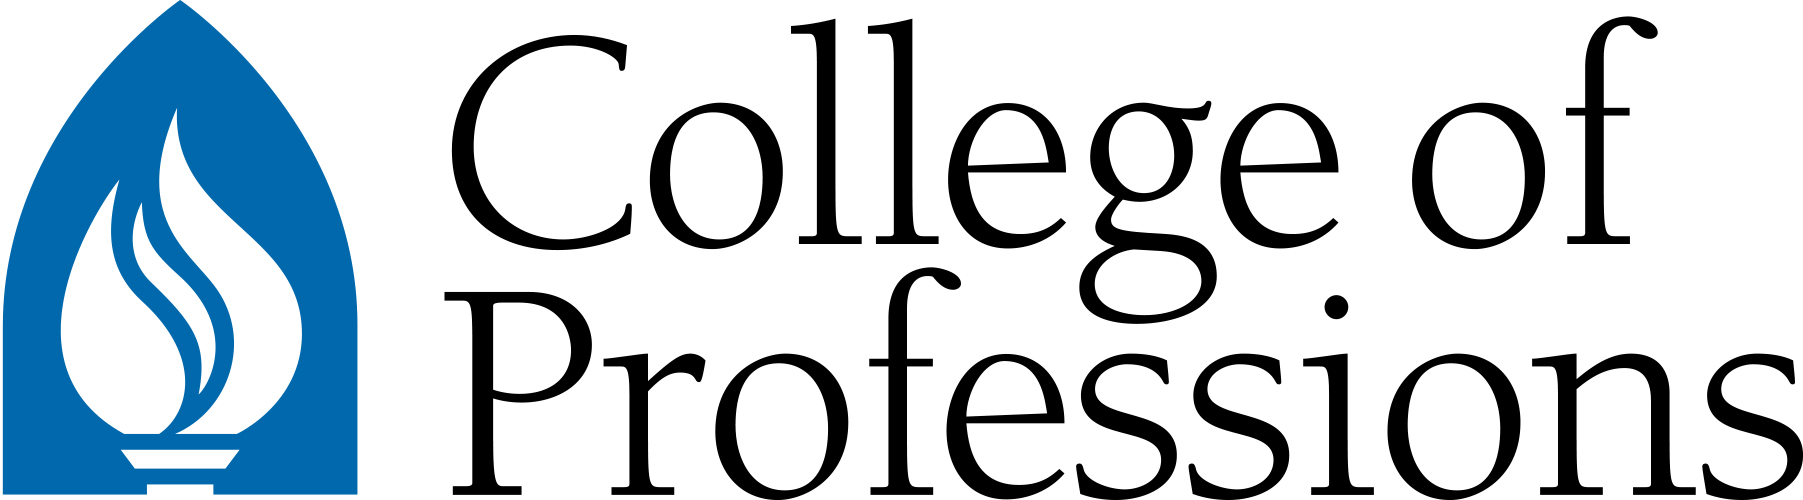 College of Professions